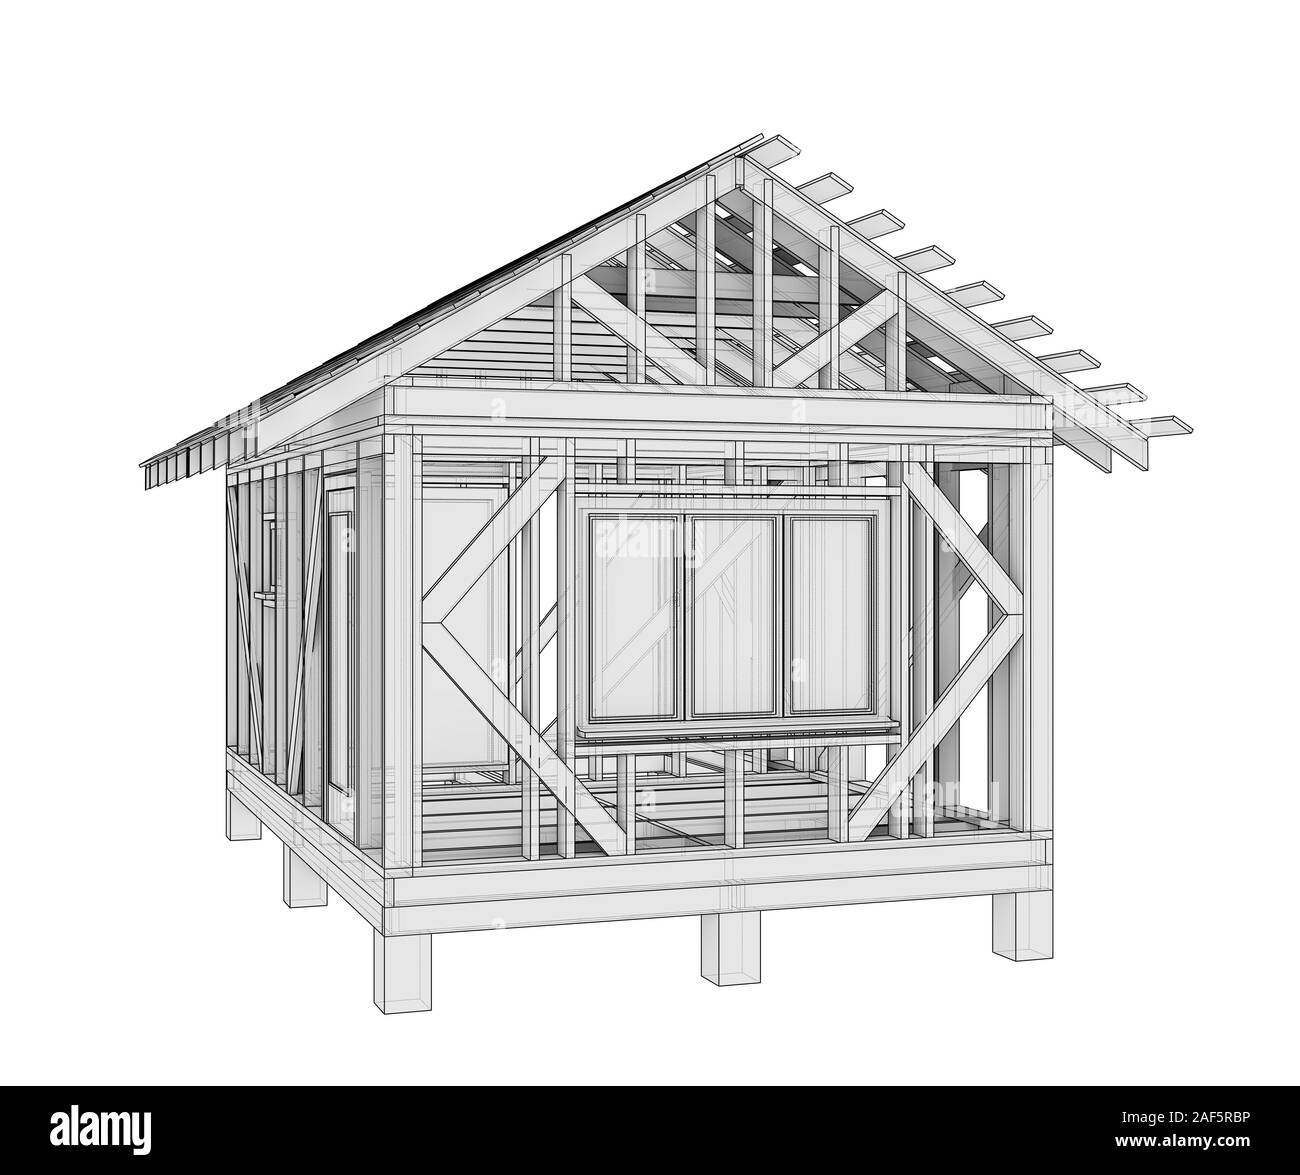 3D illustration of a small frame house. Isolated on a white background Stock Photo